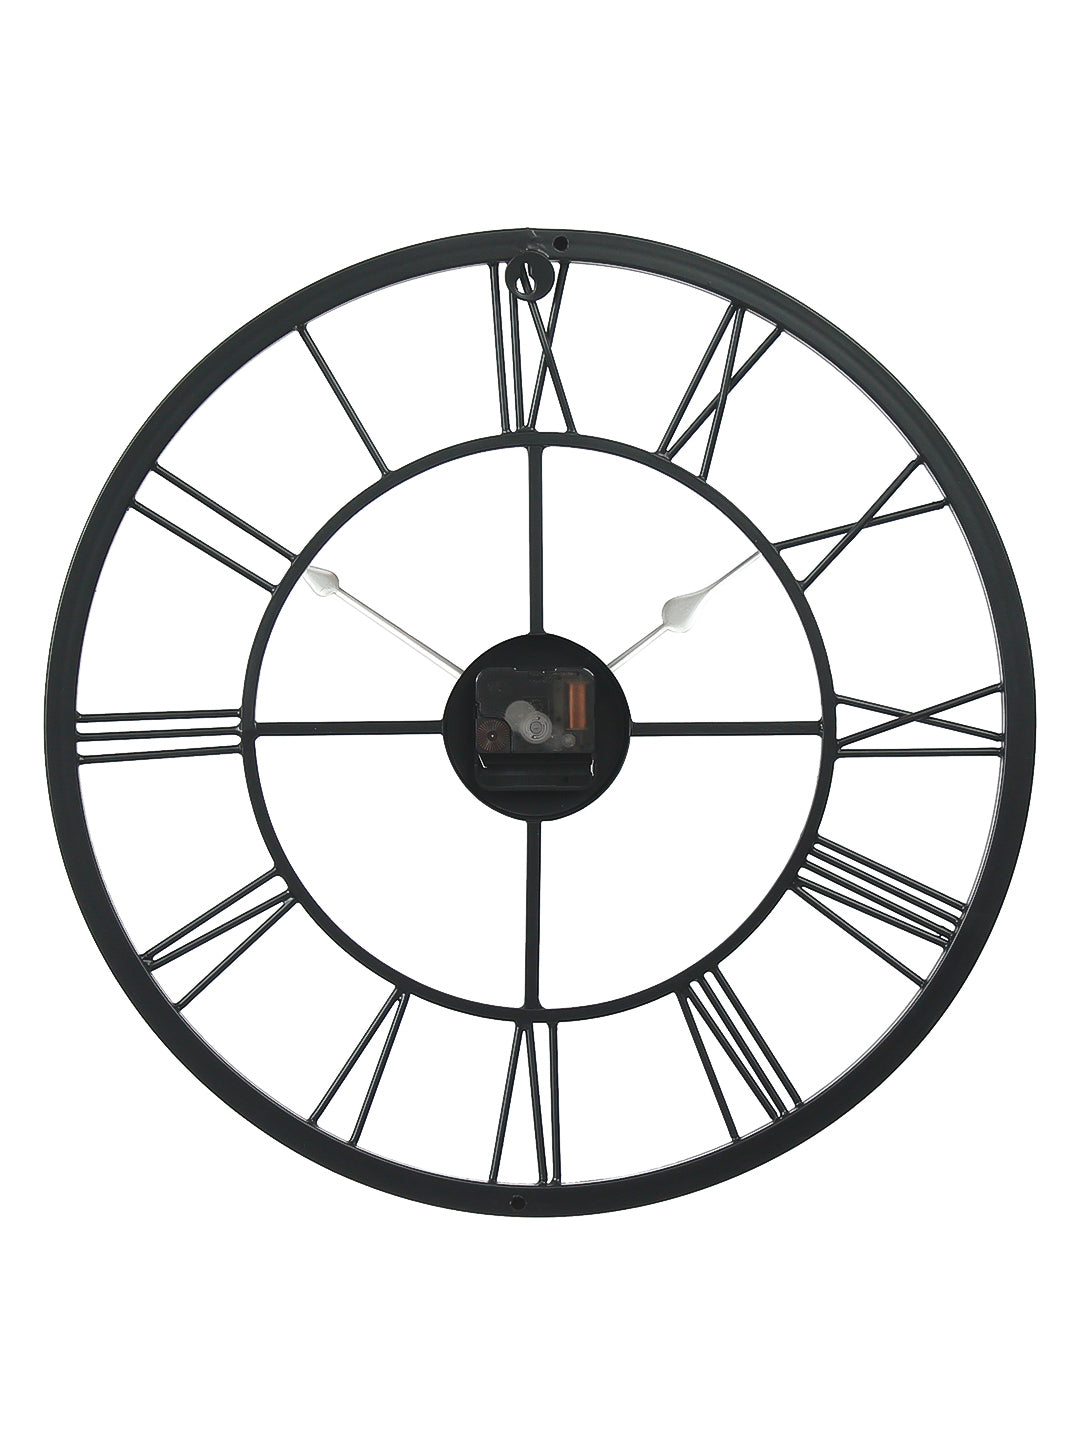 Black Iron Round Handcrafted Analog Roman Numeral Wall Clock Without Glass 6